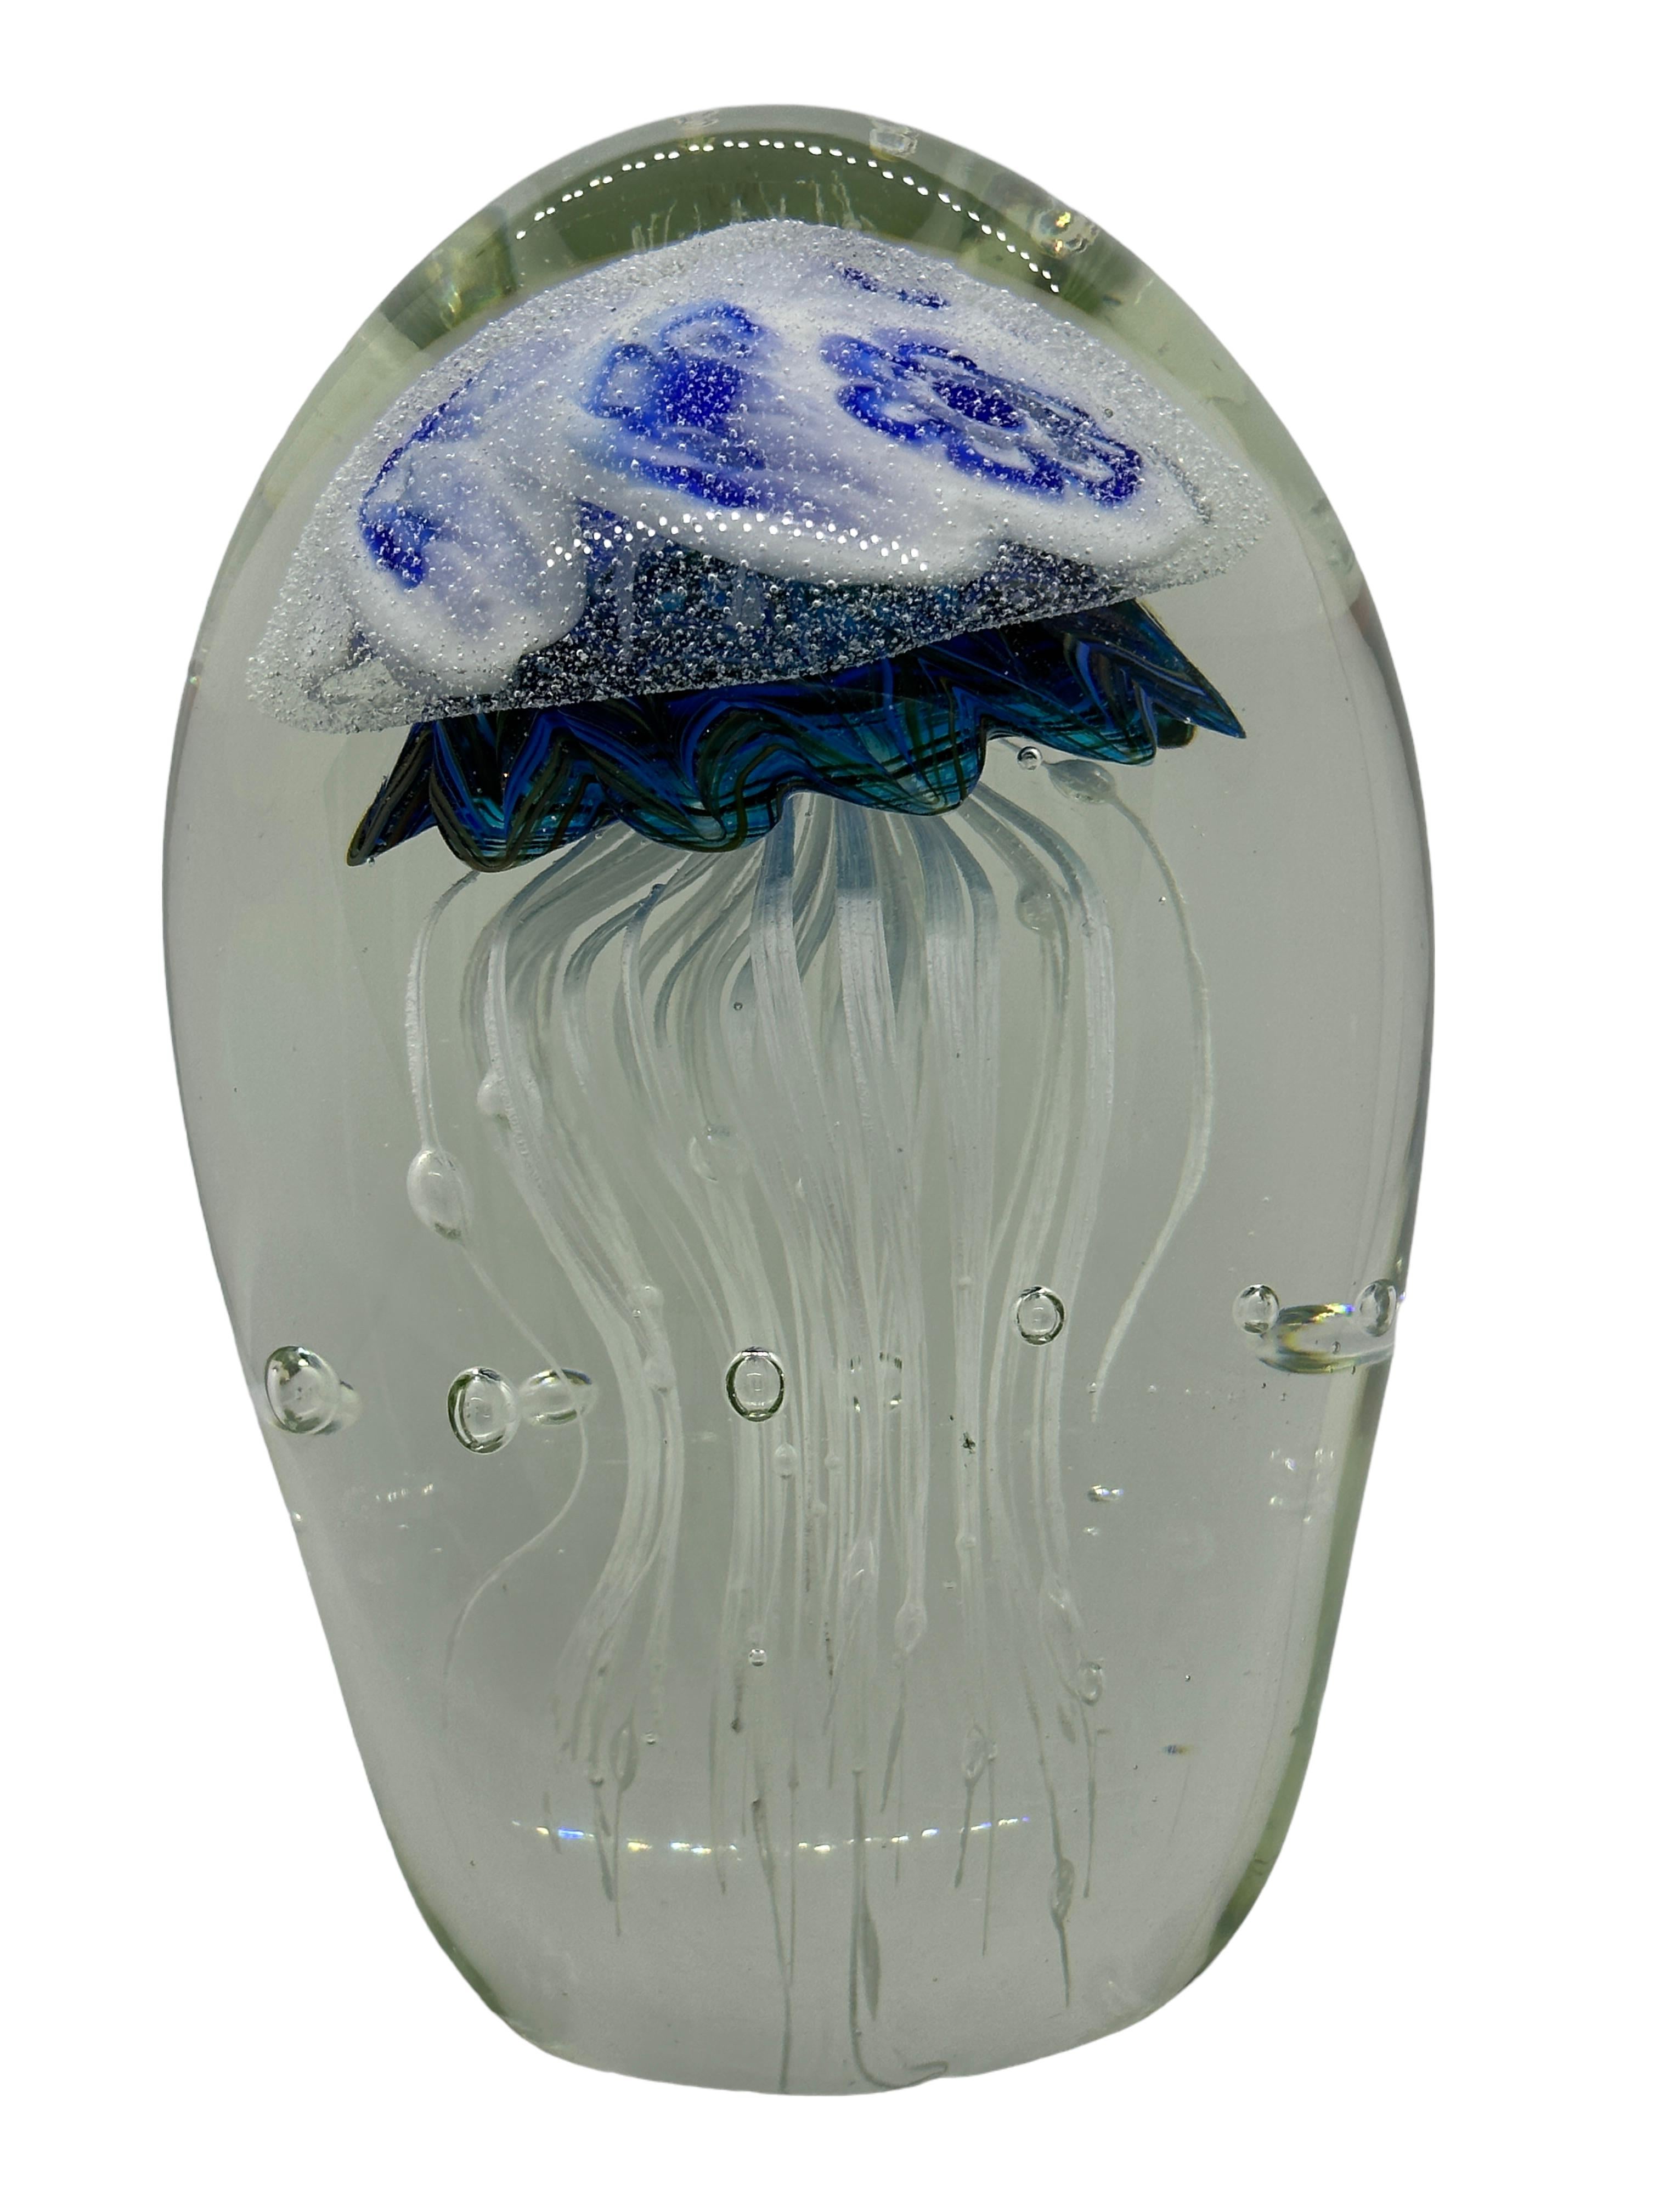 Beautiful stunning large Murano hand blown aquarium design Italian art glass sculpture. Showing a large Jelly Fish inside, in different colors, floating on controlled bubbles. A beautiful nice addition at your table, credenza or side board.